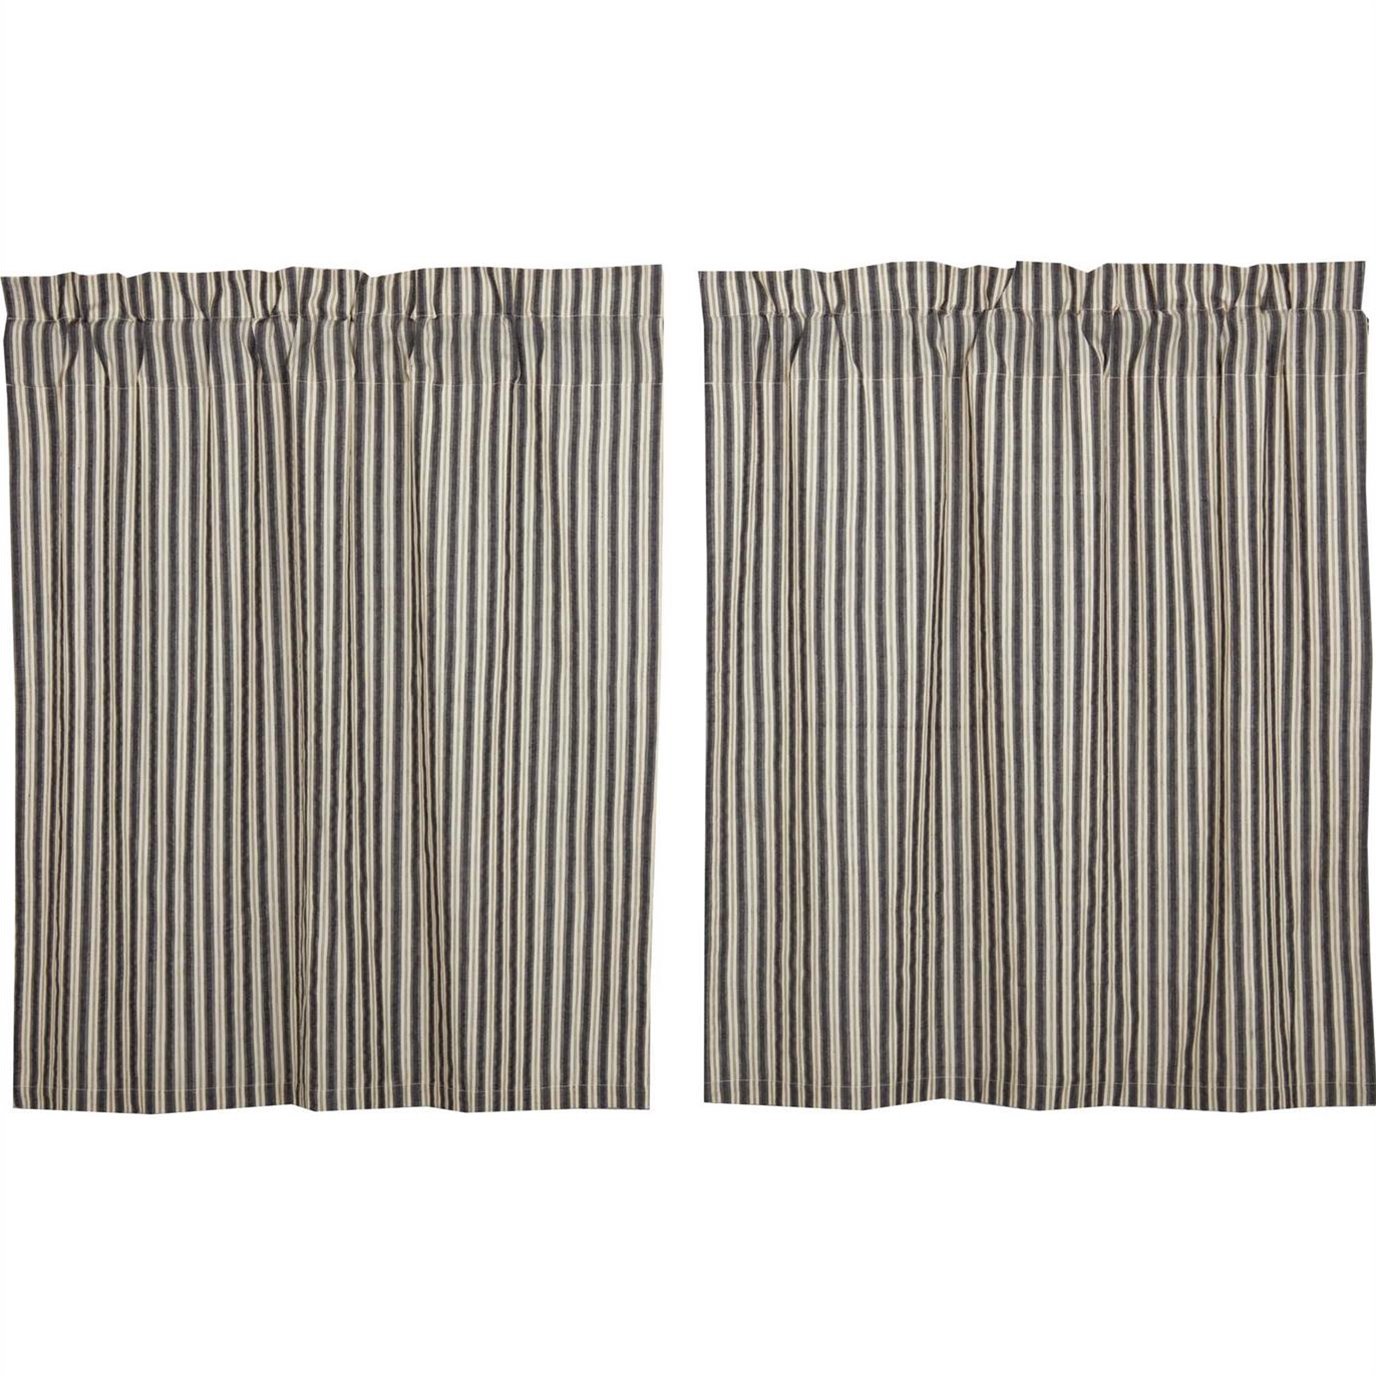 Ashmont Ticking Stripe Tier Set of 2 L36xW36 by April & Olive - VHC Brands